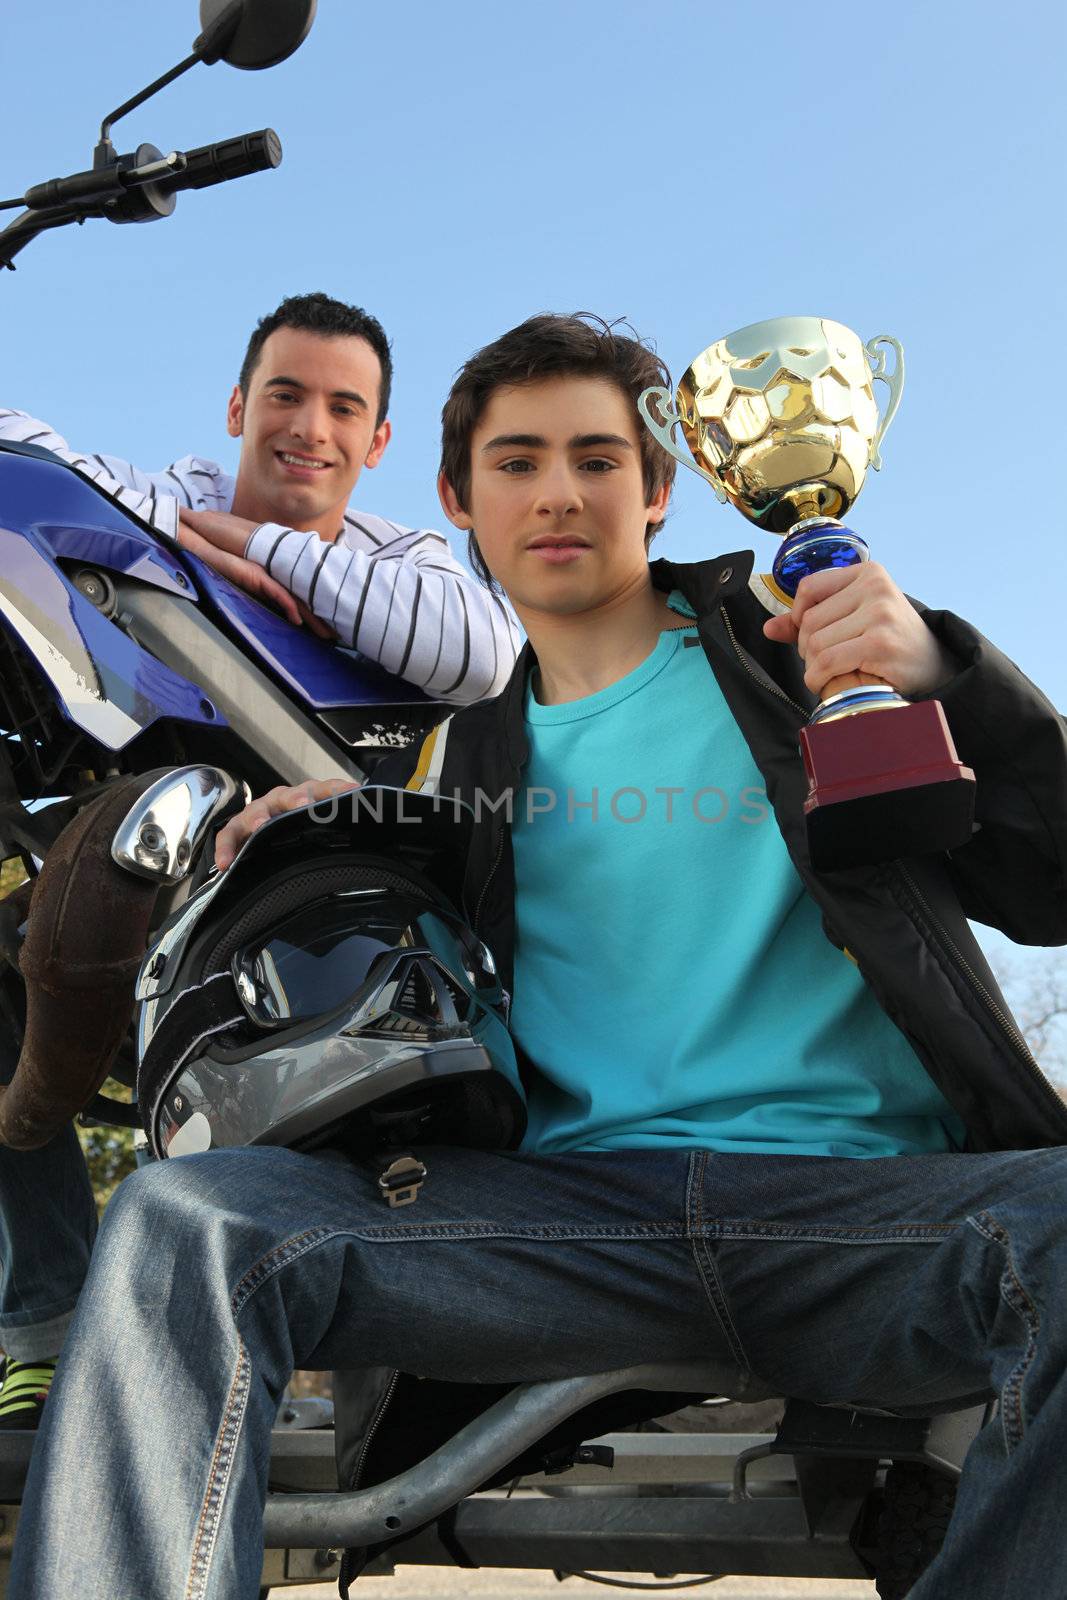 A man with a motorcycle and a trophy. by phovoir